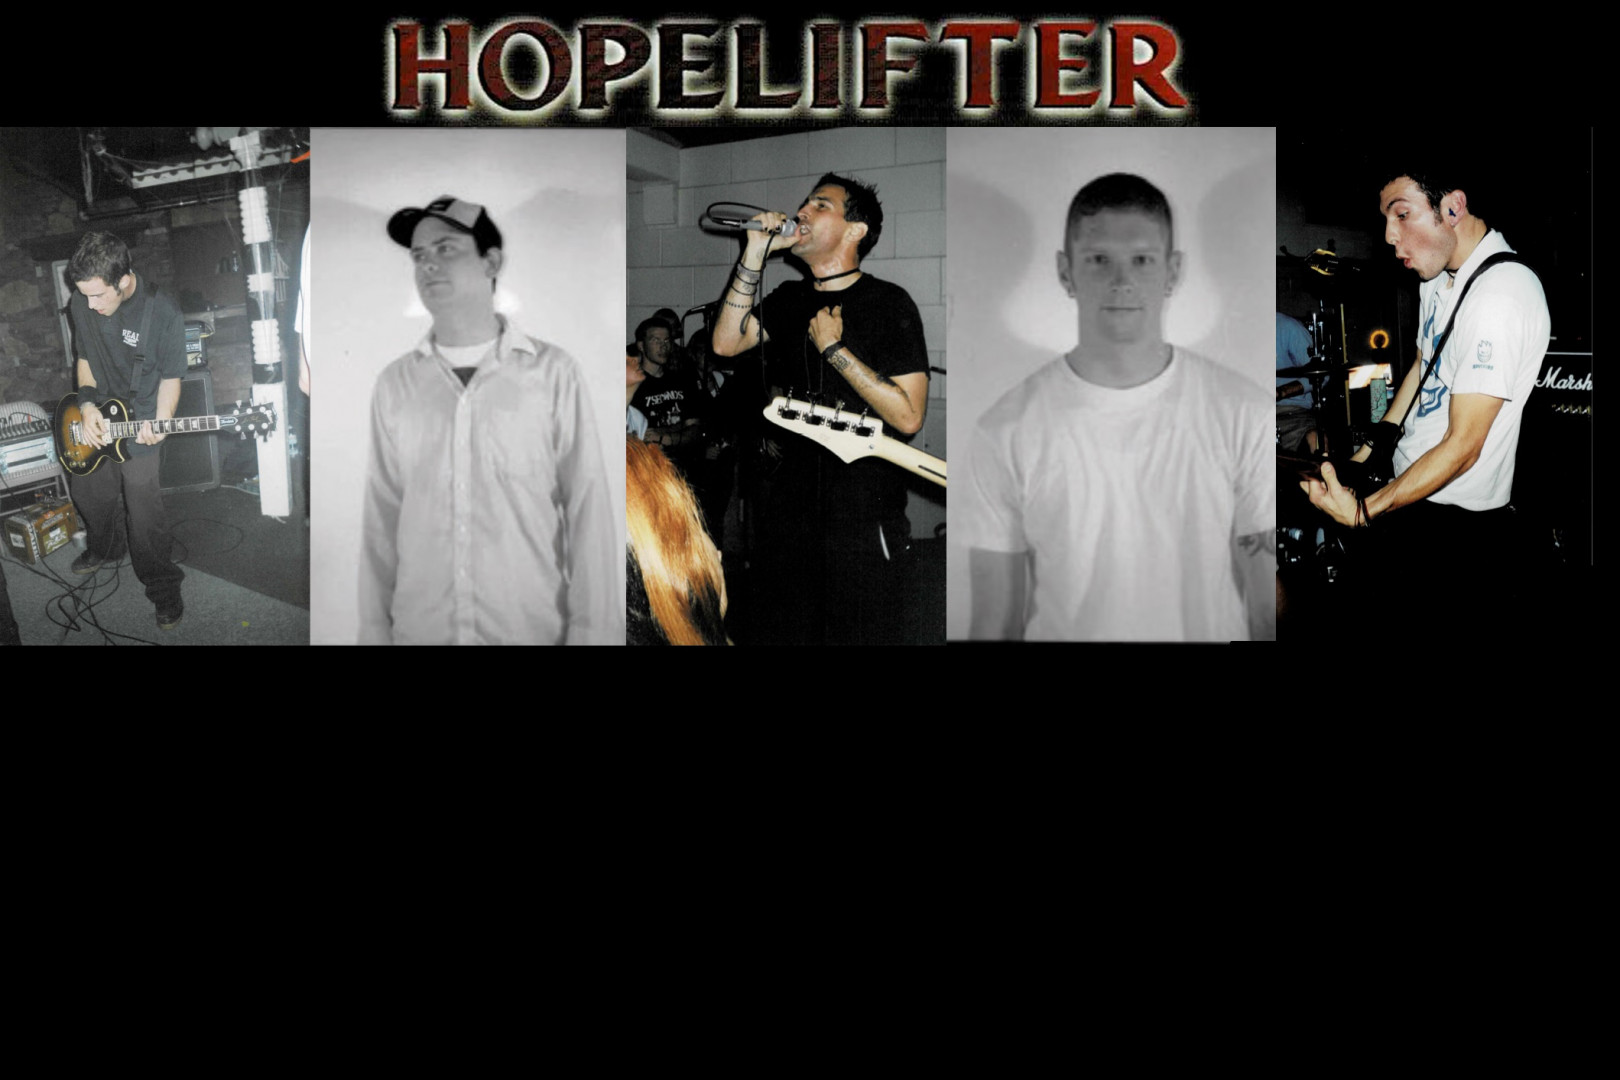 Hopelifter has a vinyl discography coming out! Check out a remastered track!